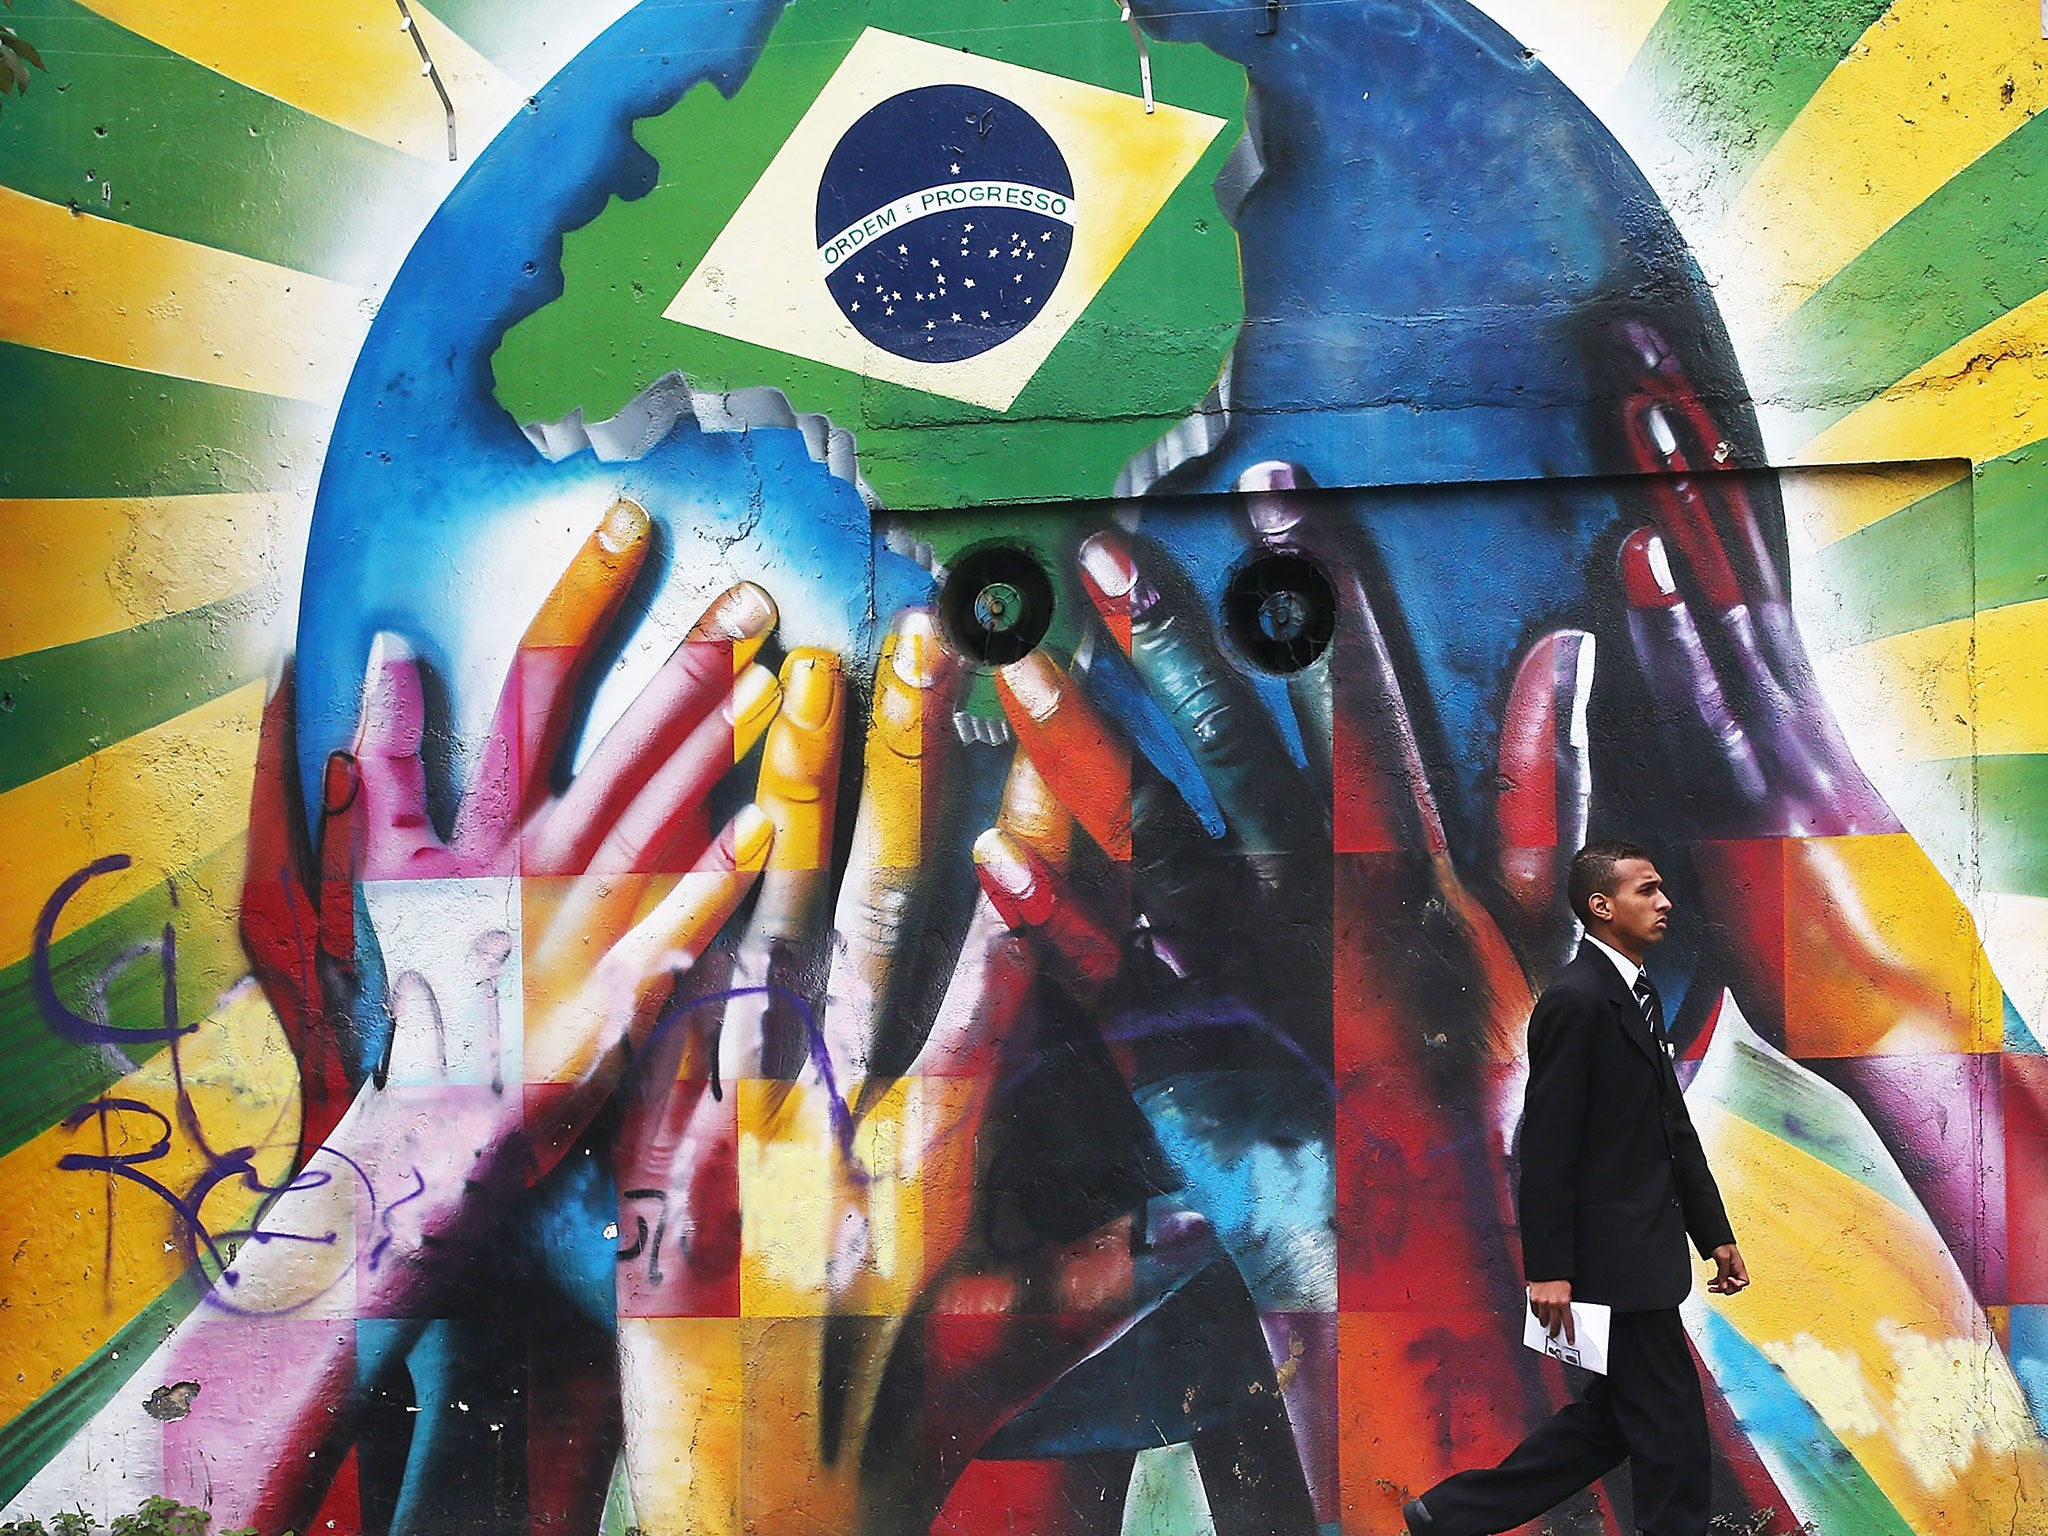 Brazil's World Cup street art ranges from the positive to the darkly political